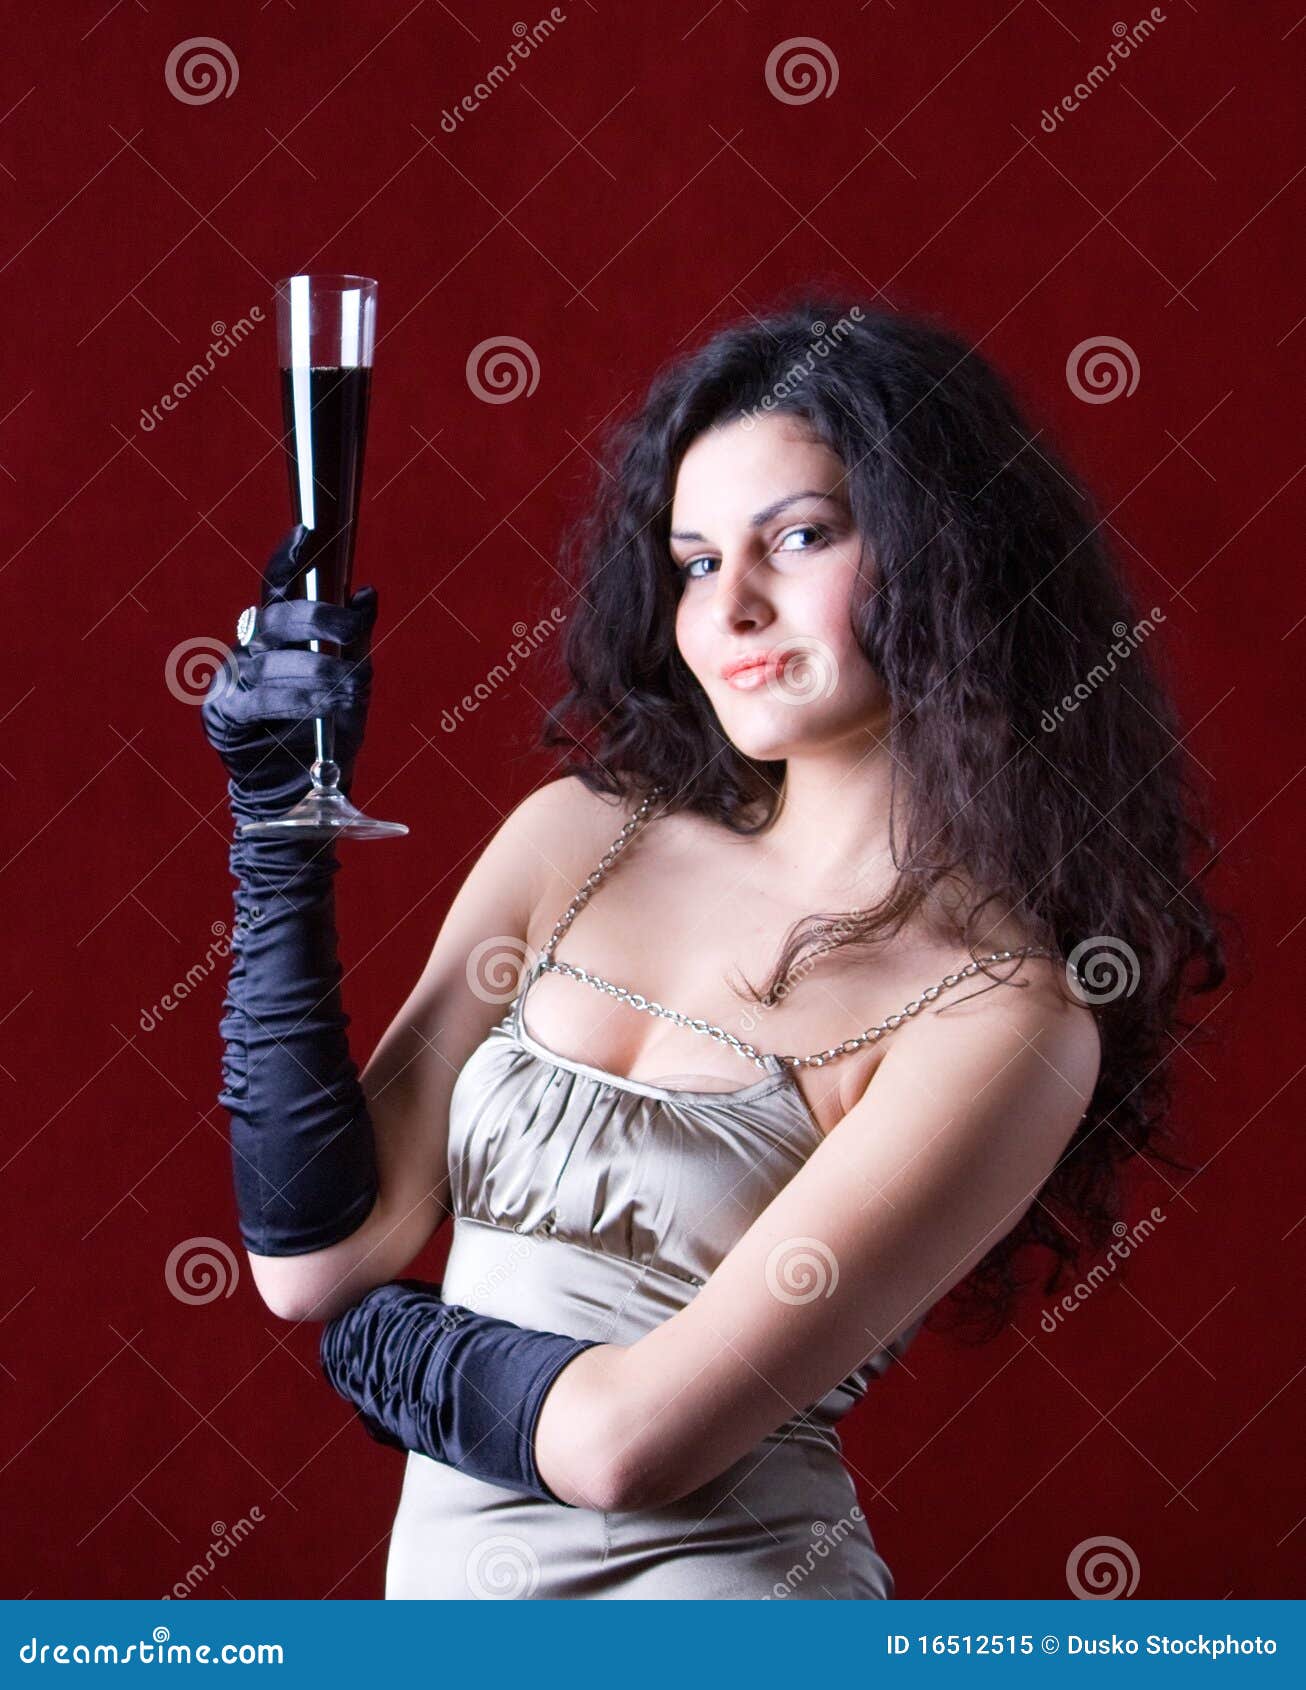 Beautiful Woman Holding A Glass Of Wine Royalty Free Stock